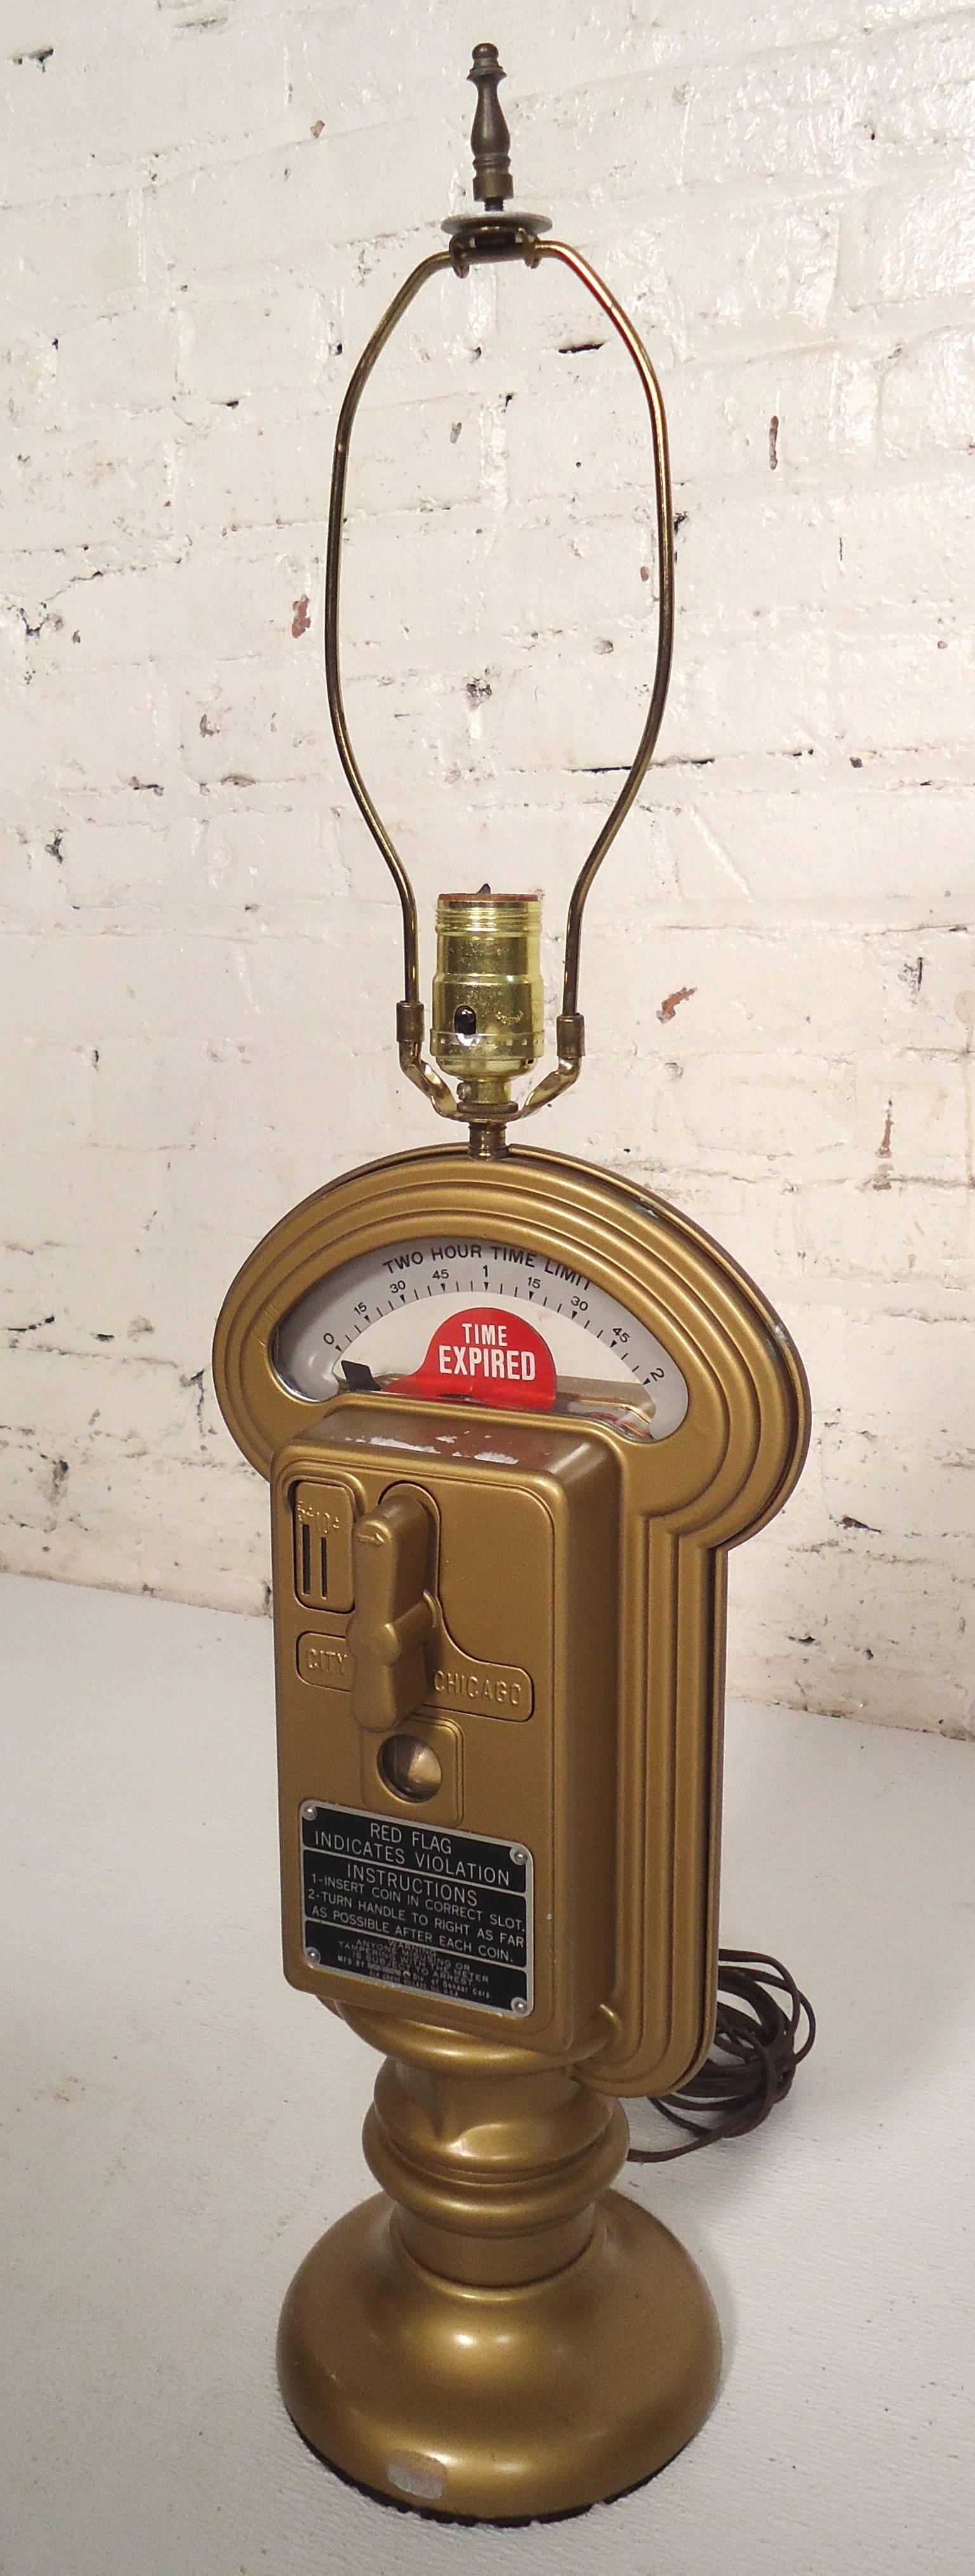 This vintage Duncan Miller city of Chicago parking meter table lamp is very unique, features many parking meter attributes, a heavy body, made from a real Chicago parking meter.

(Please confirm item location NY or NJ with dealer).